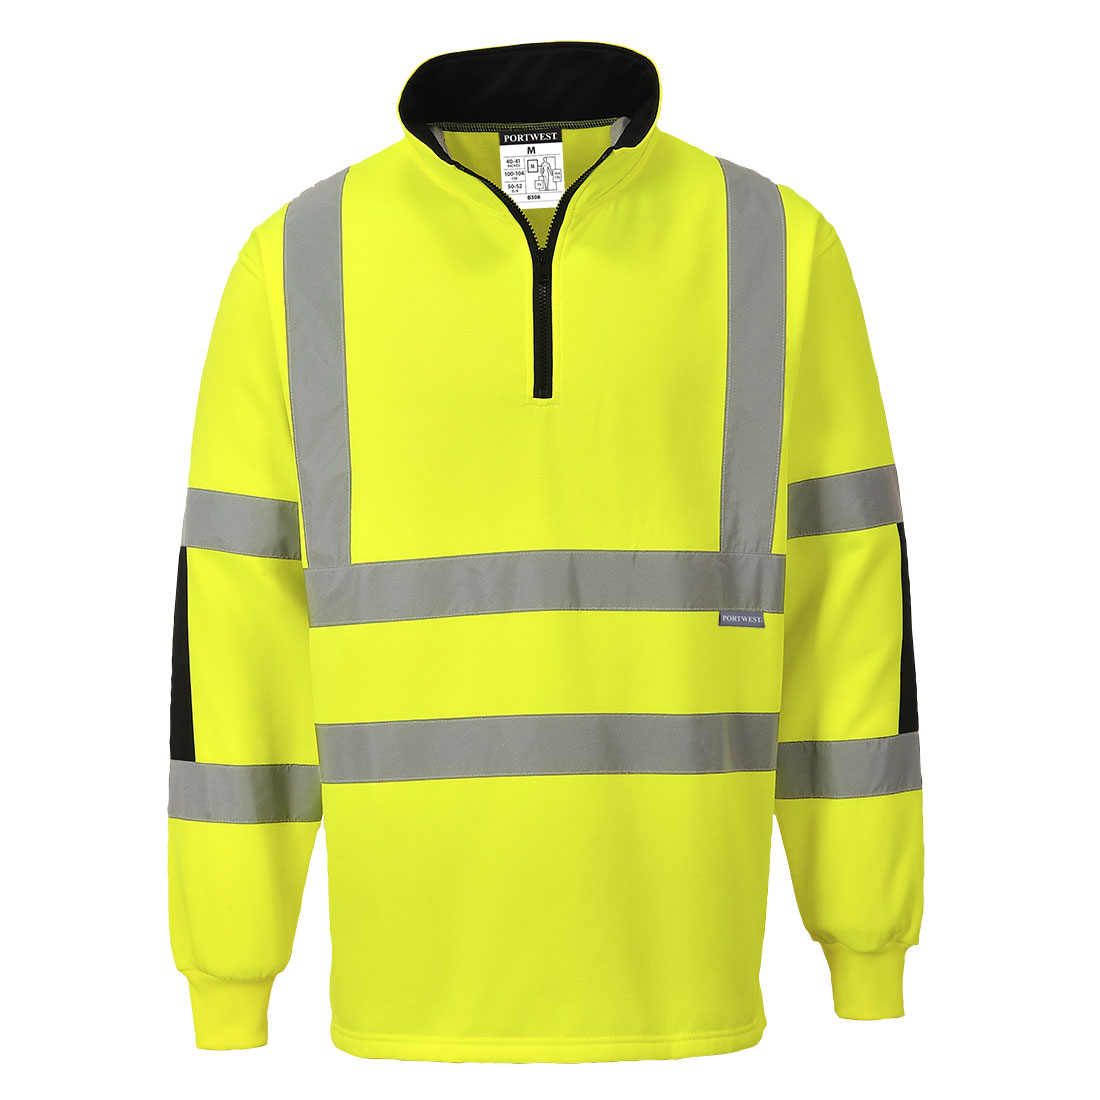 Xenon Rugby Sweatshirt, Yellow     Size Large R/Fit